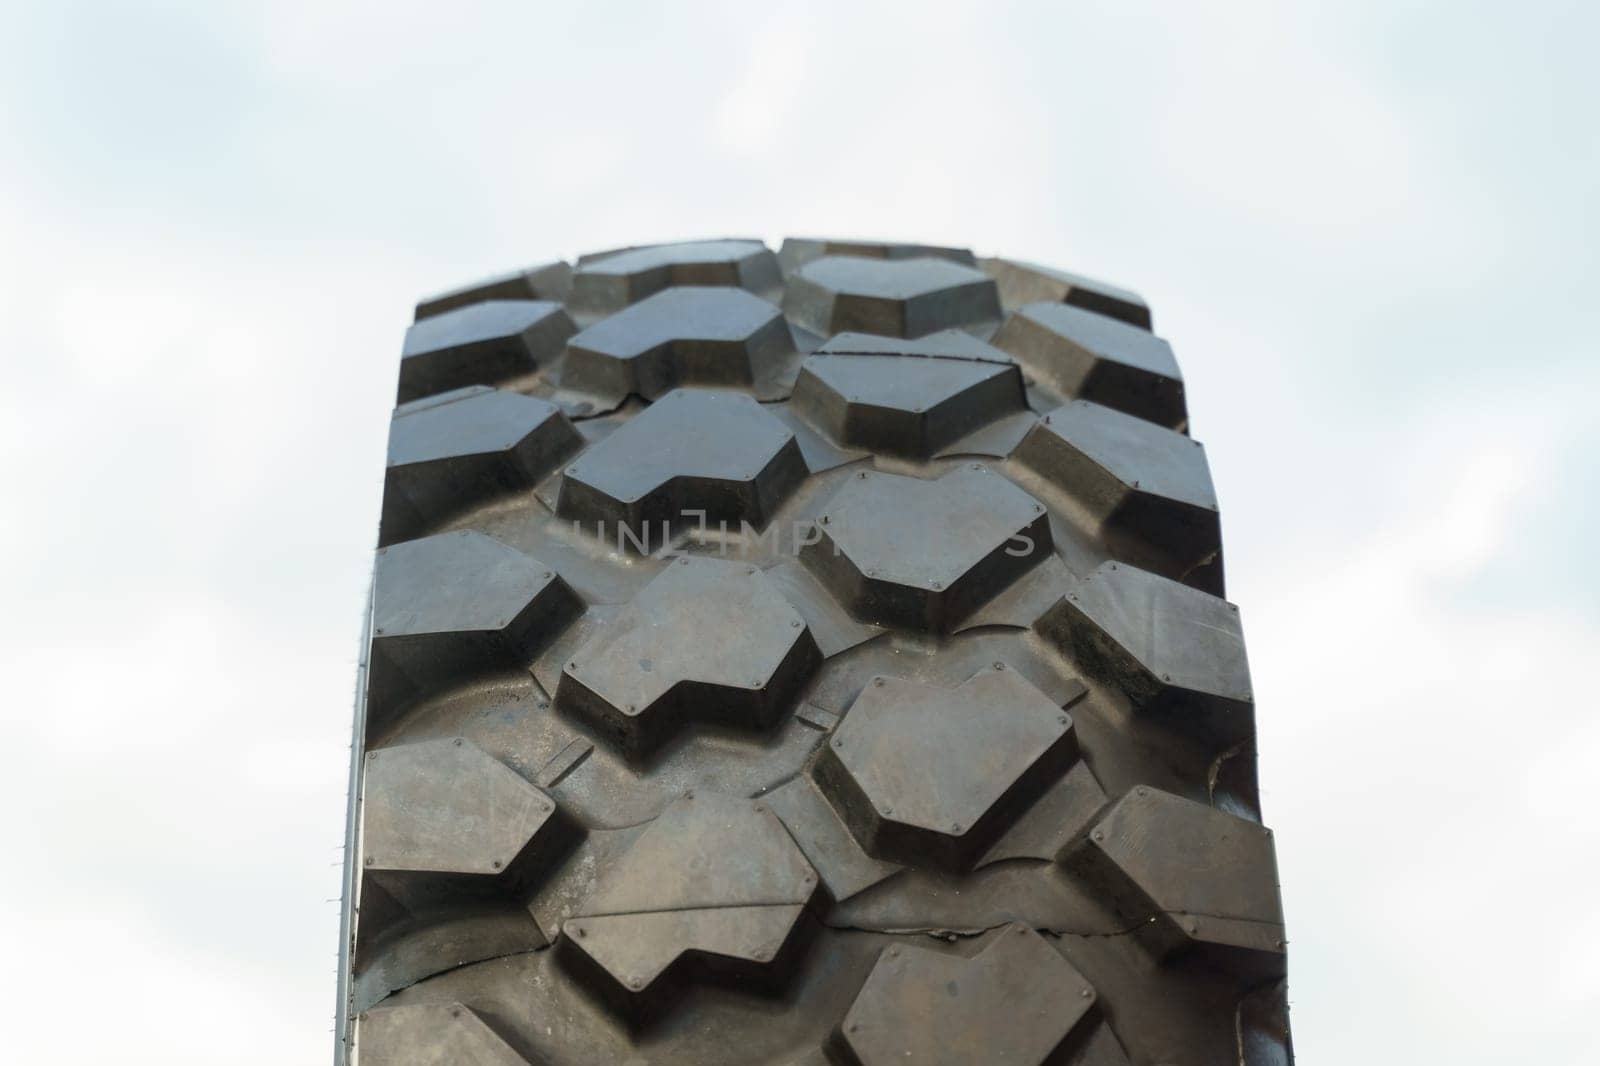 Detailed view of a tire with treads visible, set against a clear blue sky background.